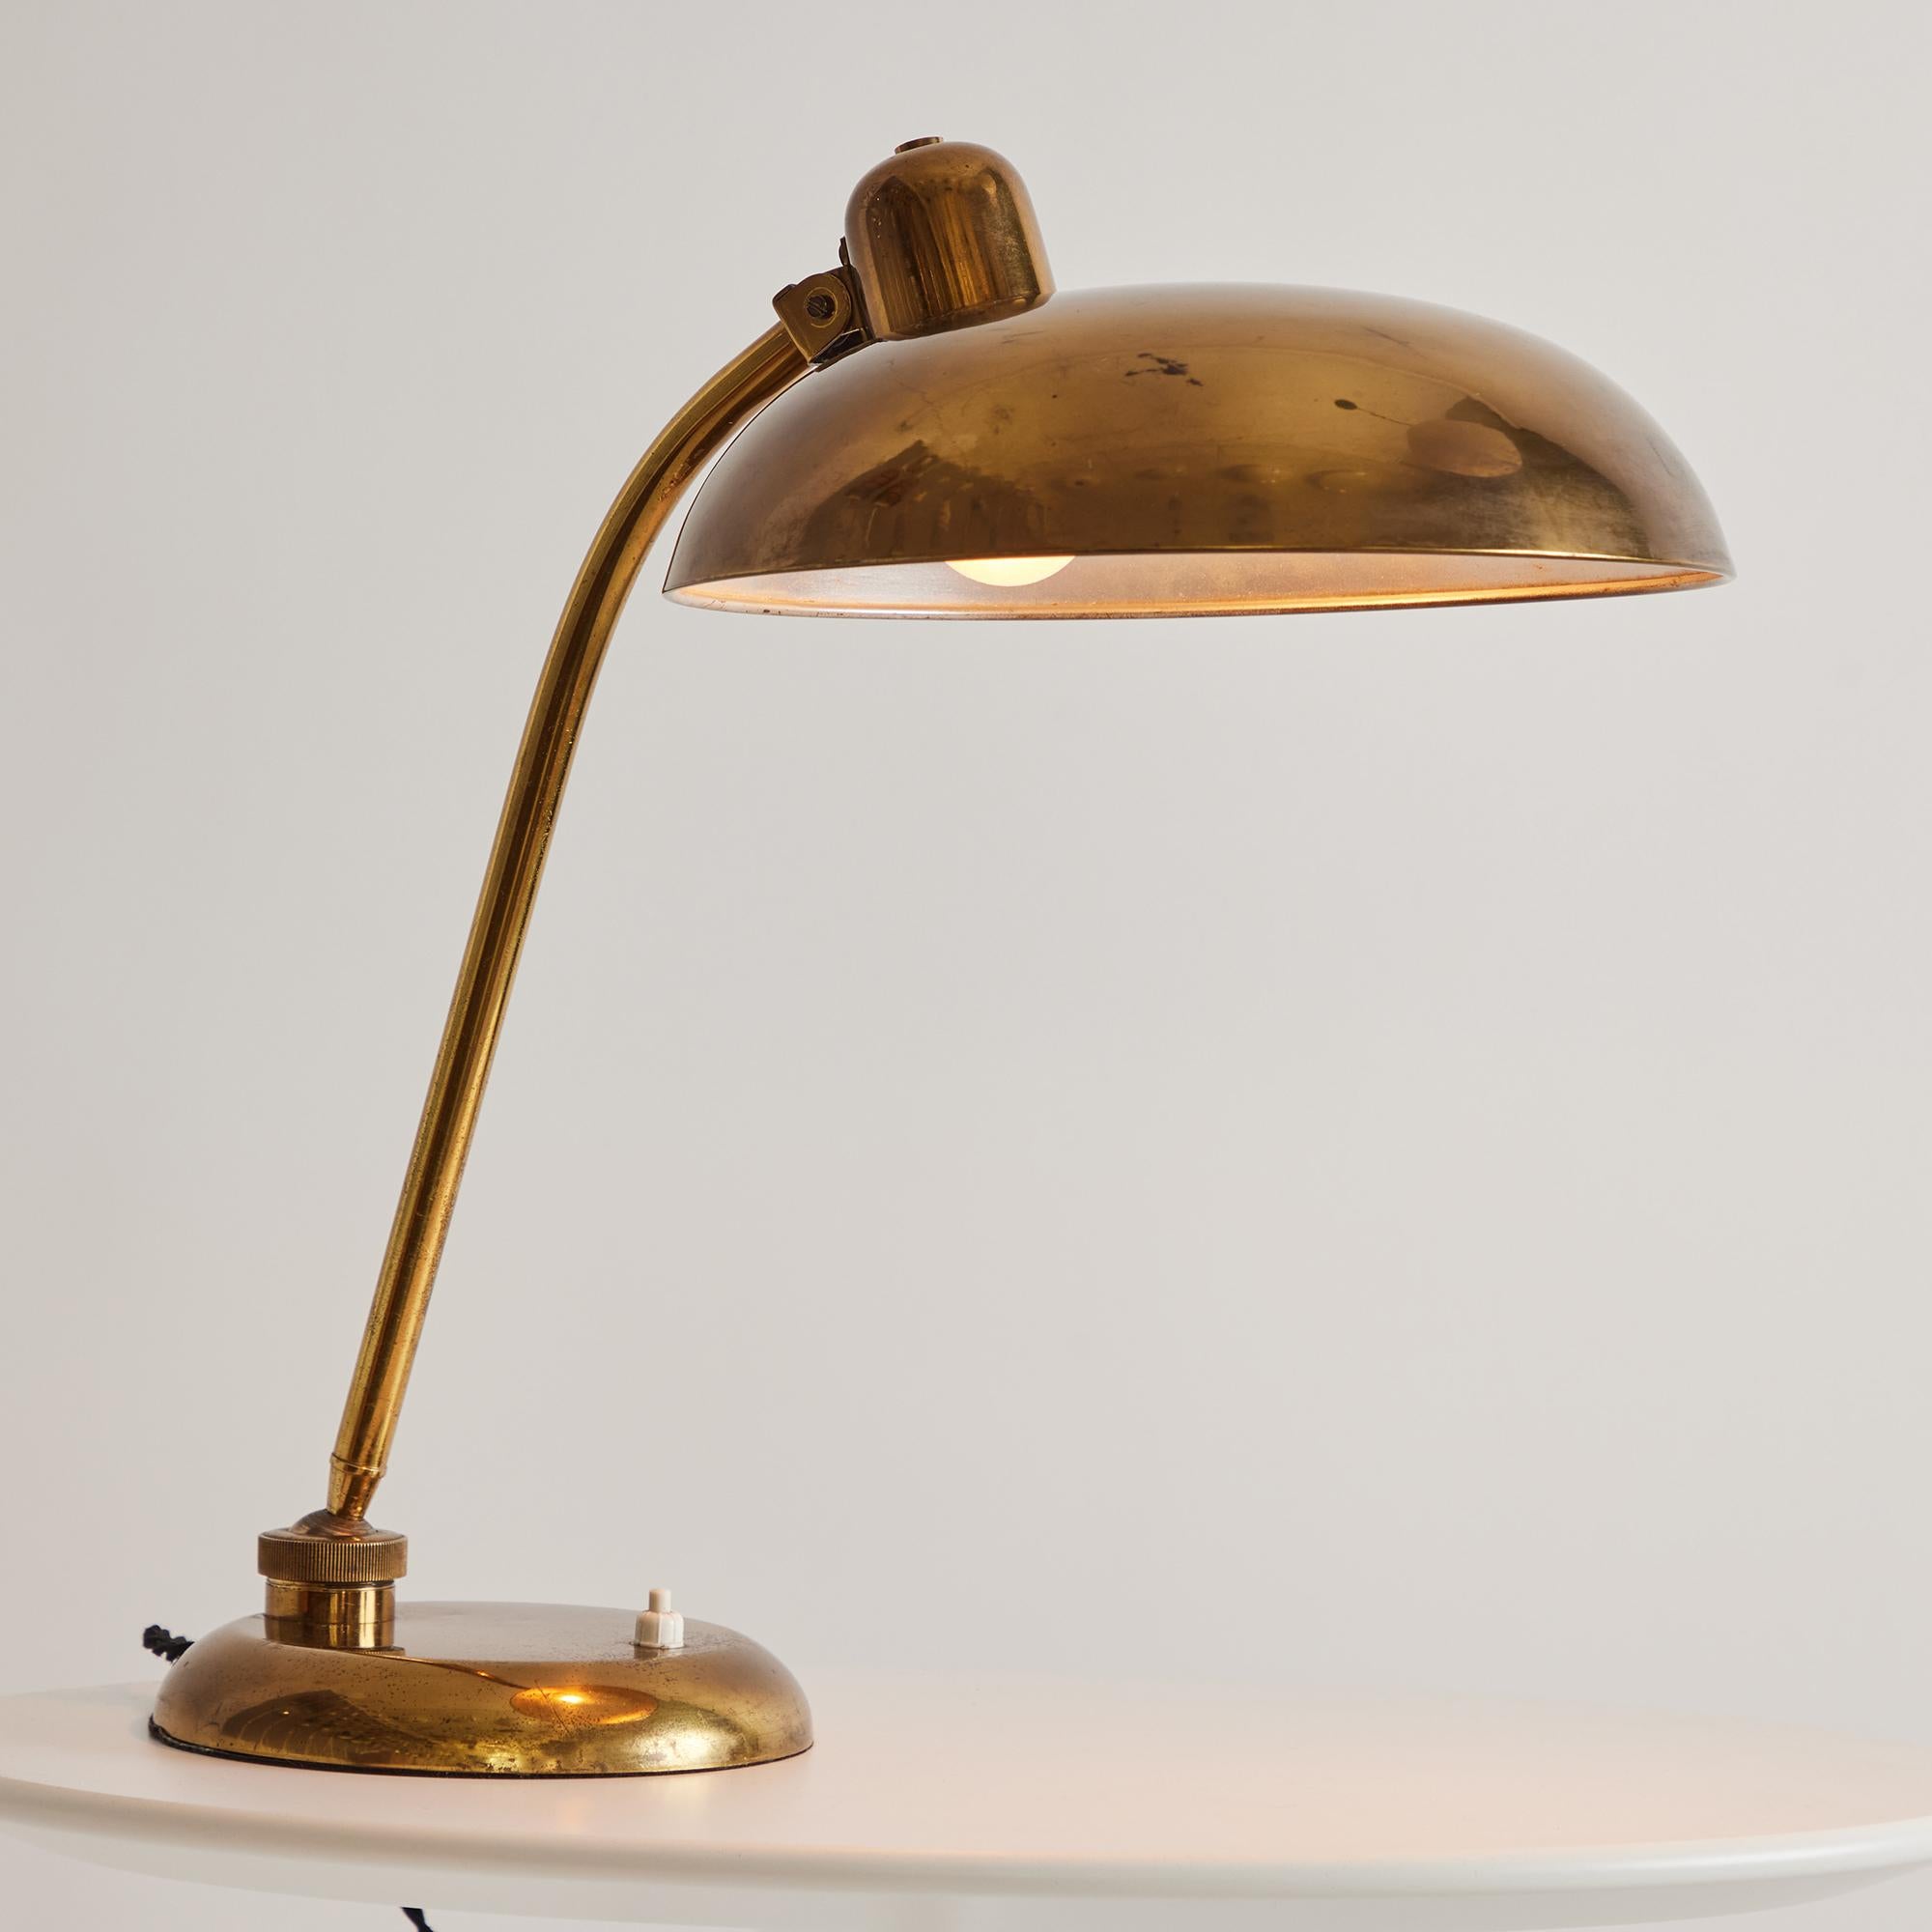 1940s Giovanni Michelucci Patinated Brass Ministerial Table Lamp for Lariolux For Sale 2